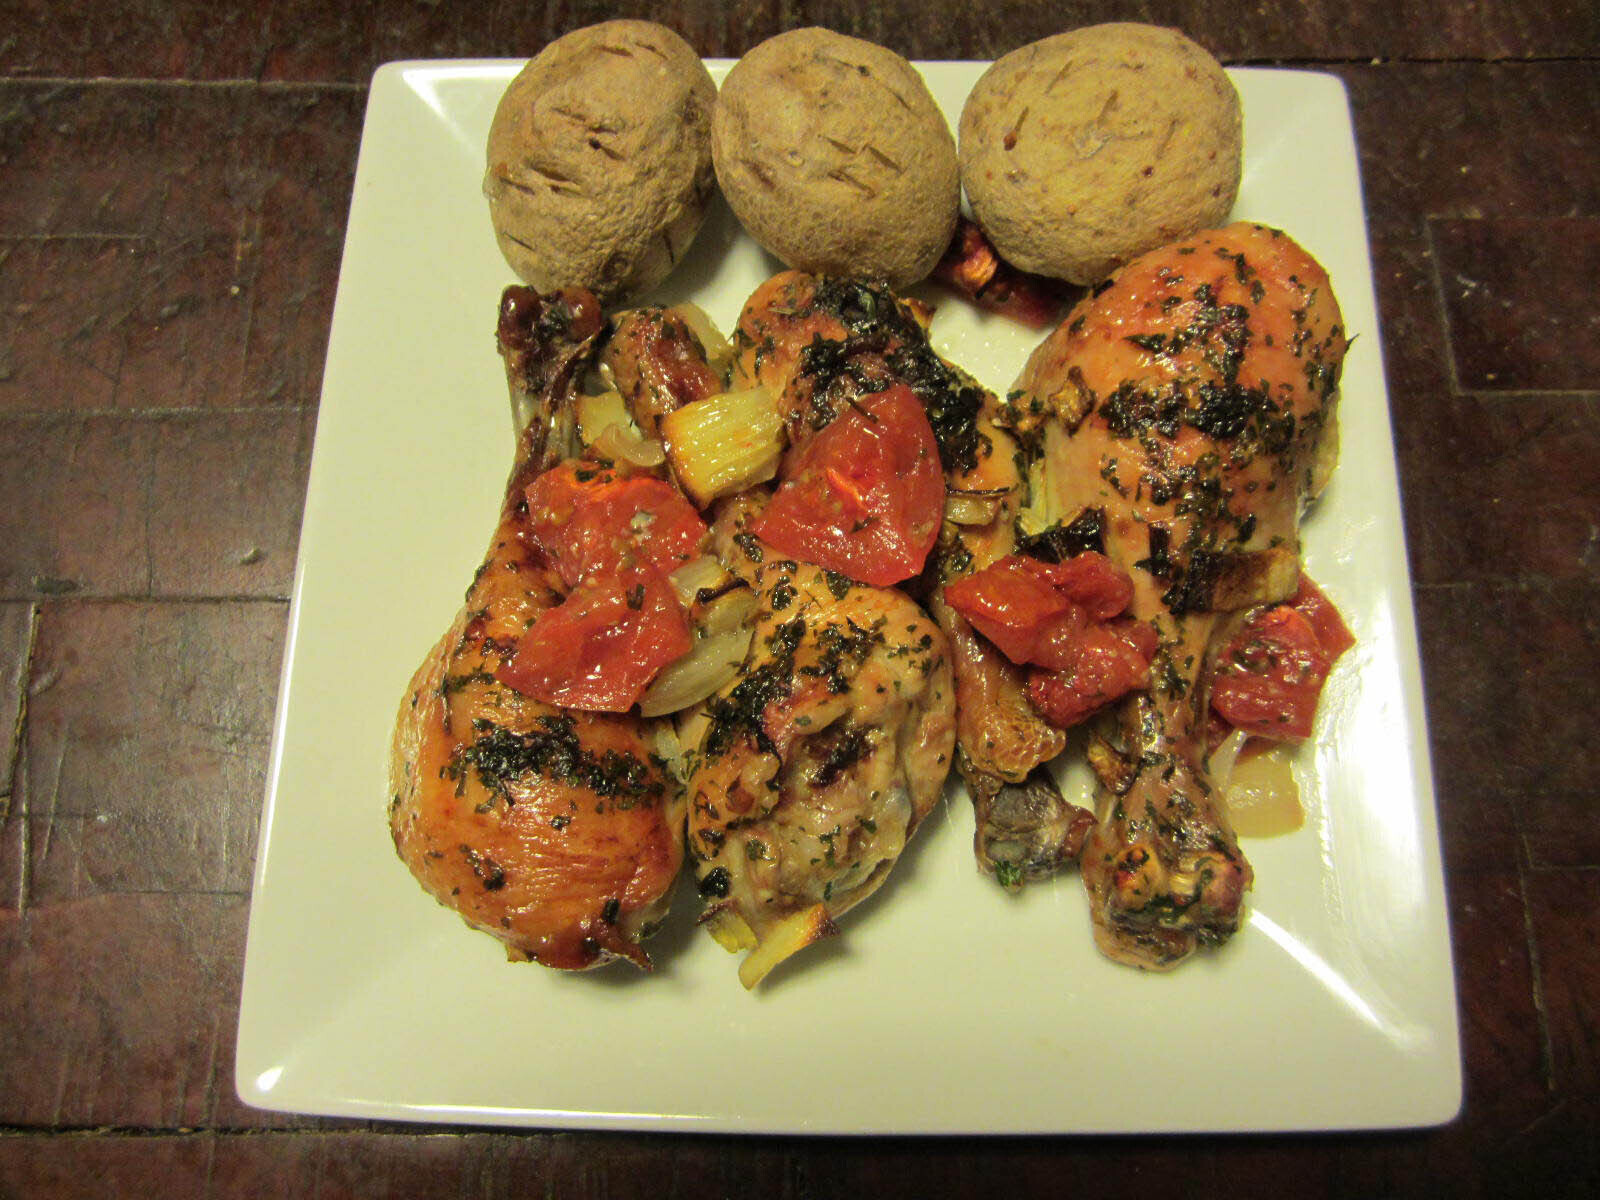 Chicken topped with tomato and onion with baked potatoes on the side